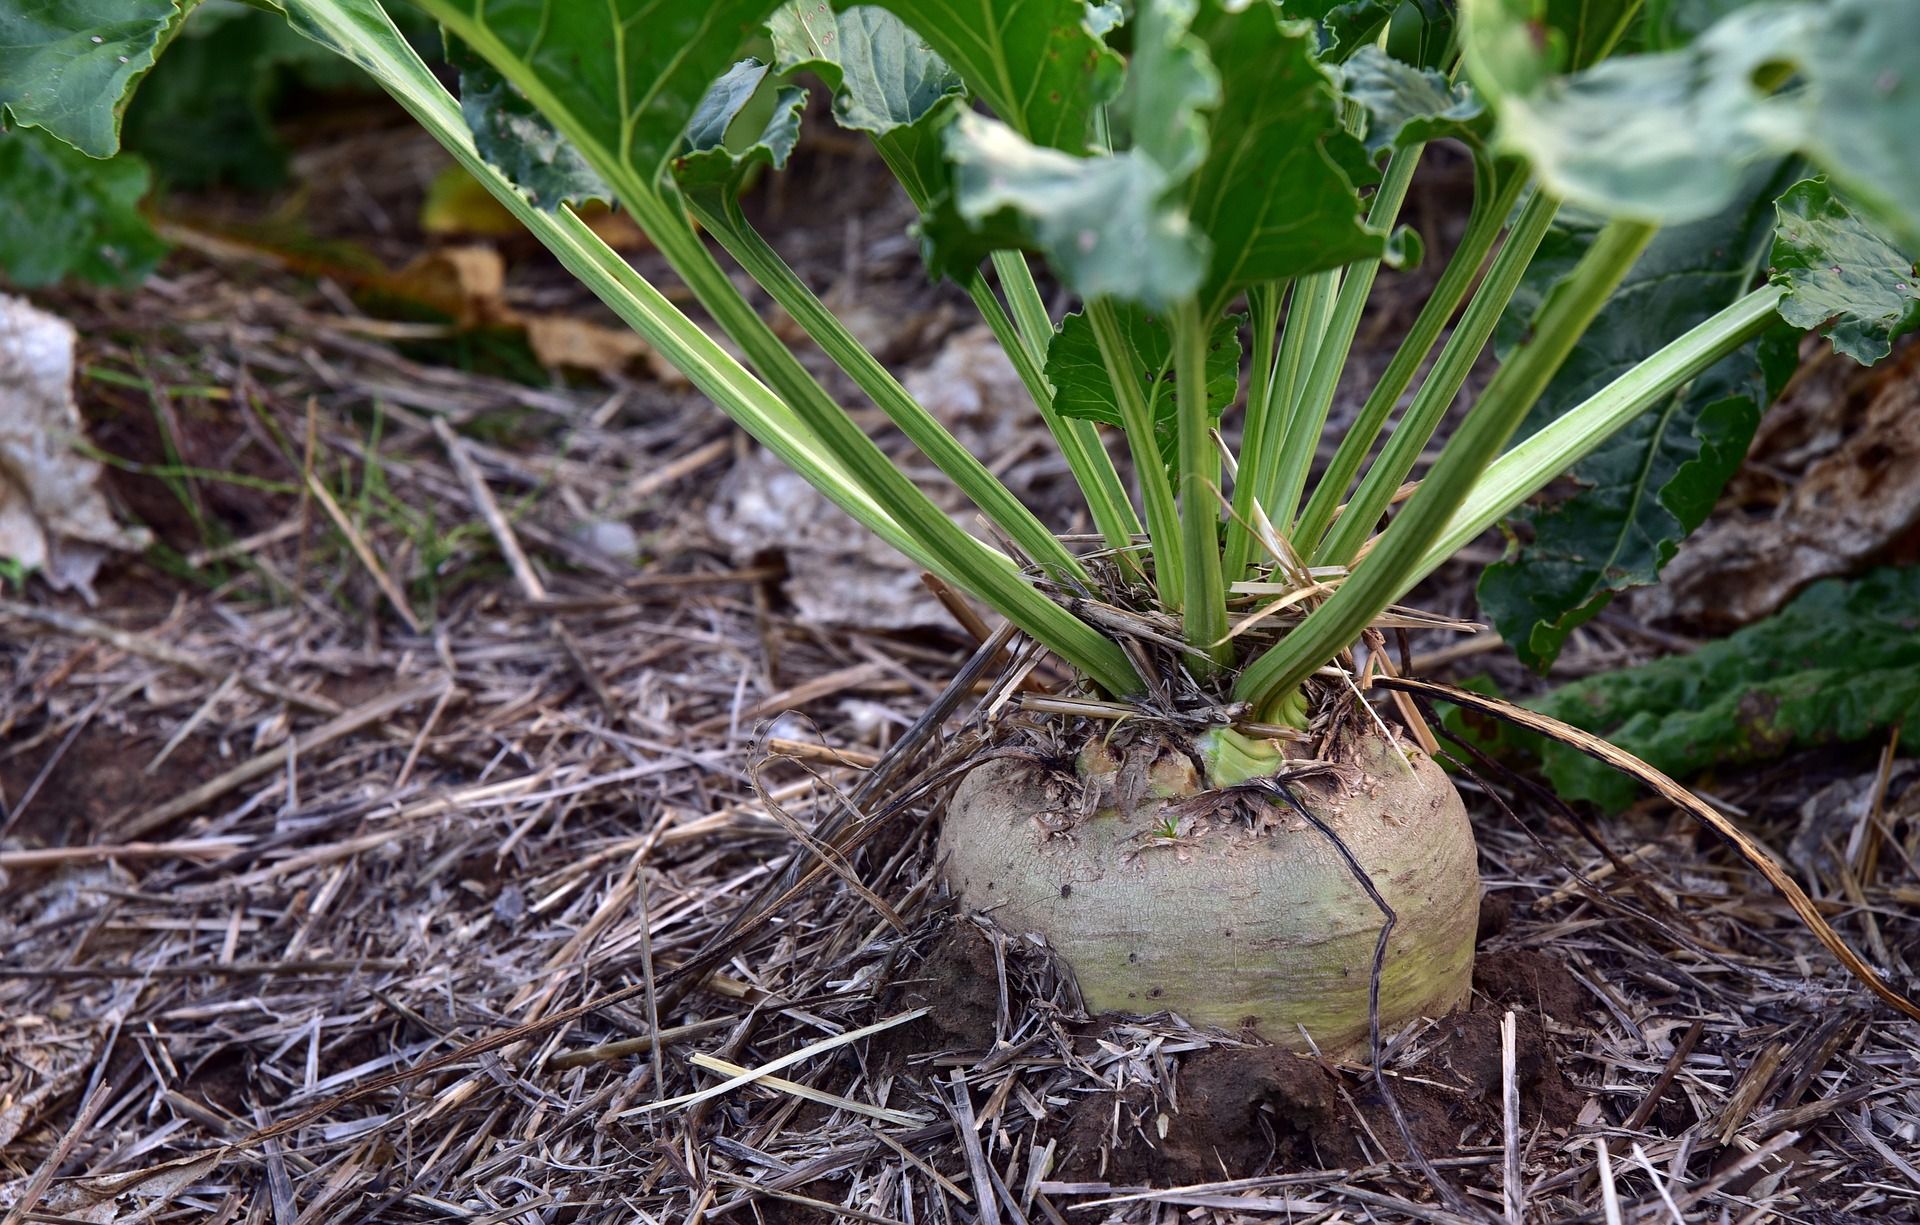 sugar beet in the ground Growing Your Own Sugar: A Guide to Growing and Processing Sugar Beets in Your Backyard